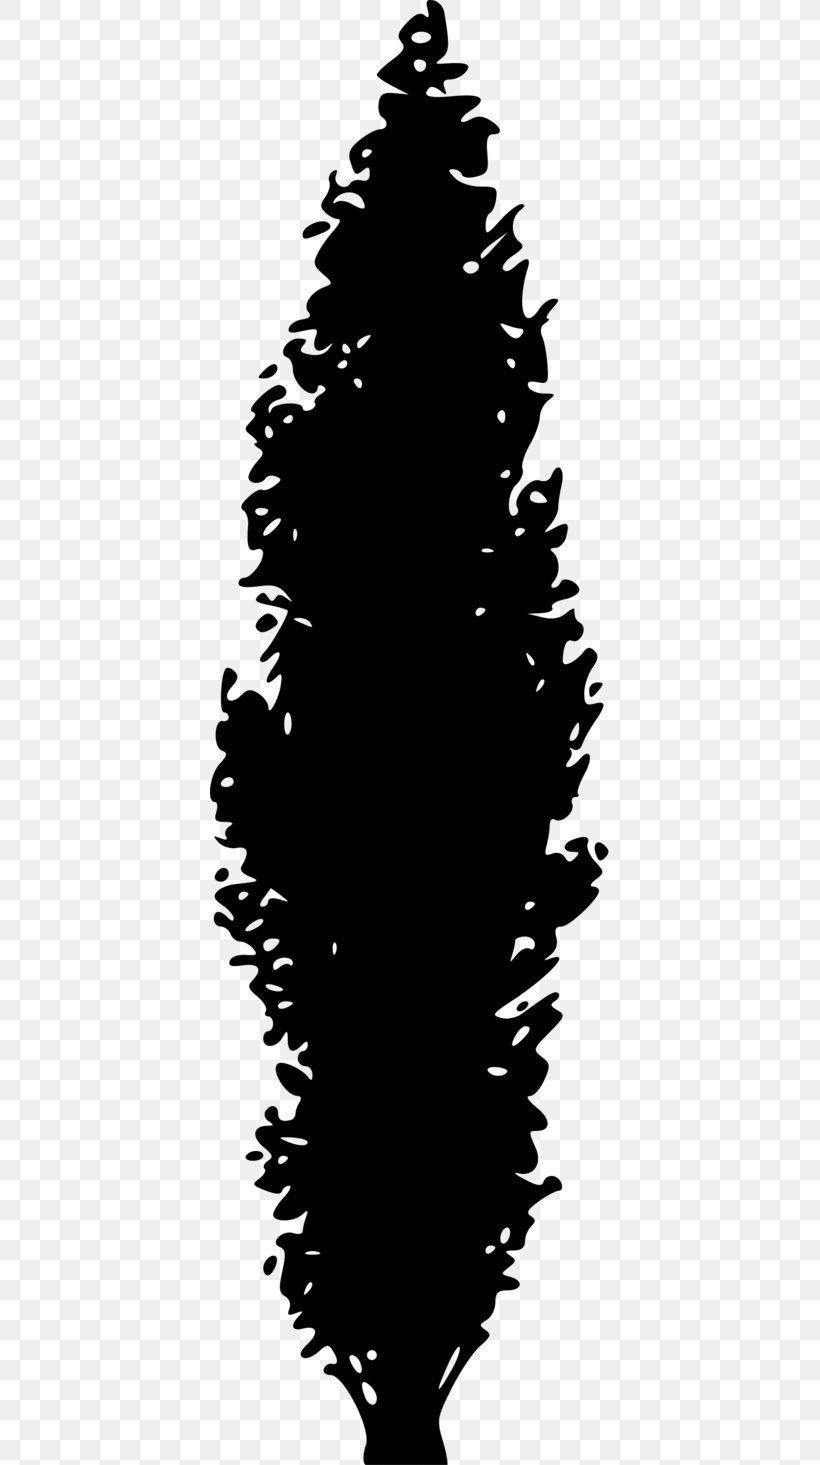 Pine Tree Conifers Evergreen Clip Art, PNG, 400x1465px, Pine, Black, Black And White, Branch, Christmas Tree Download Free